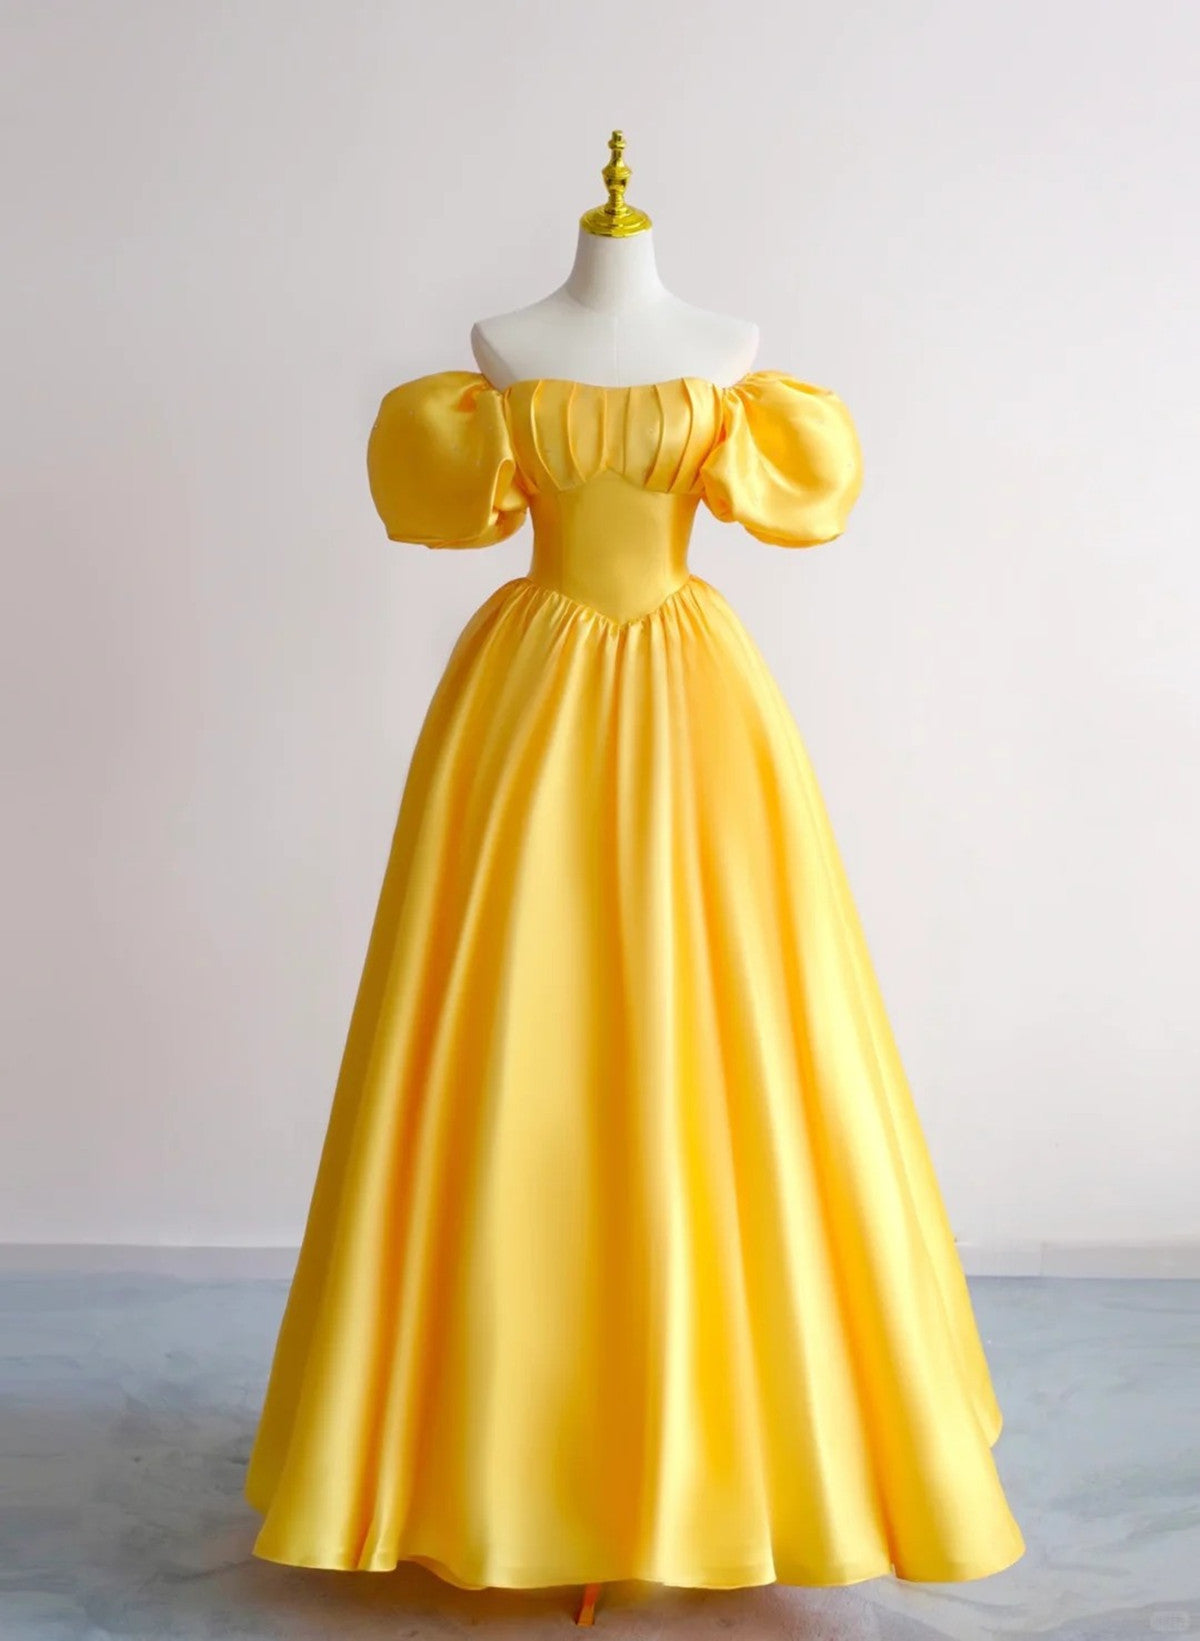 LOVECCRYellow Satin Short Sleeves Party Dress, Yellow Satin Prom Dress Formal Dress